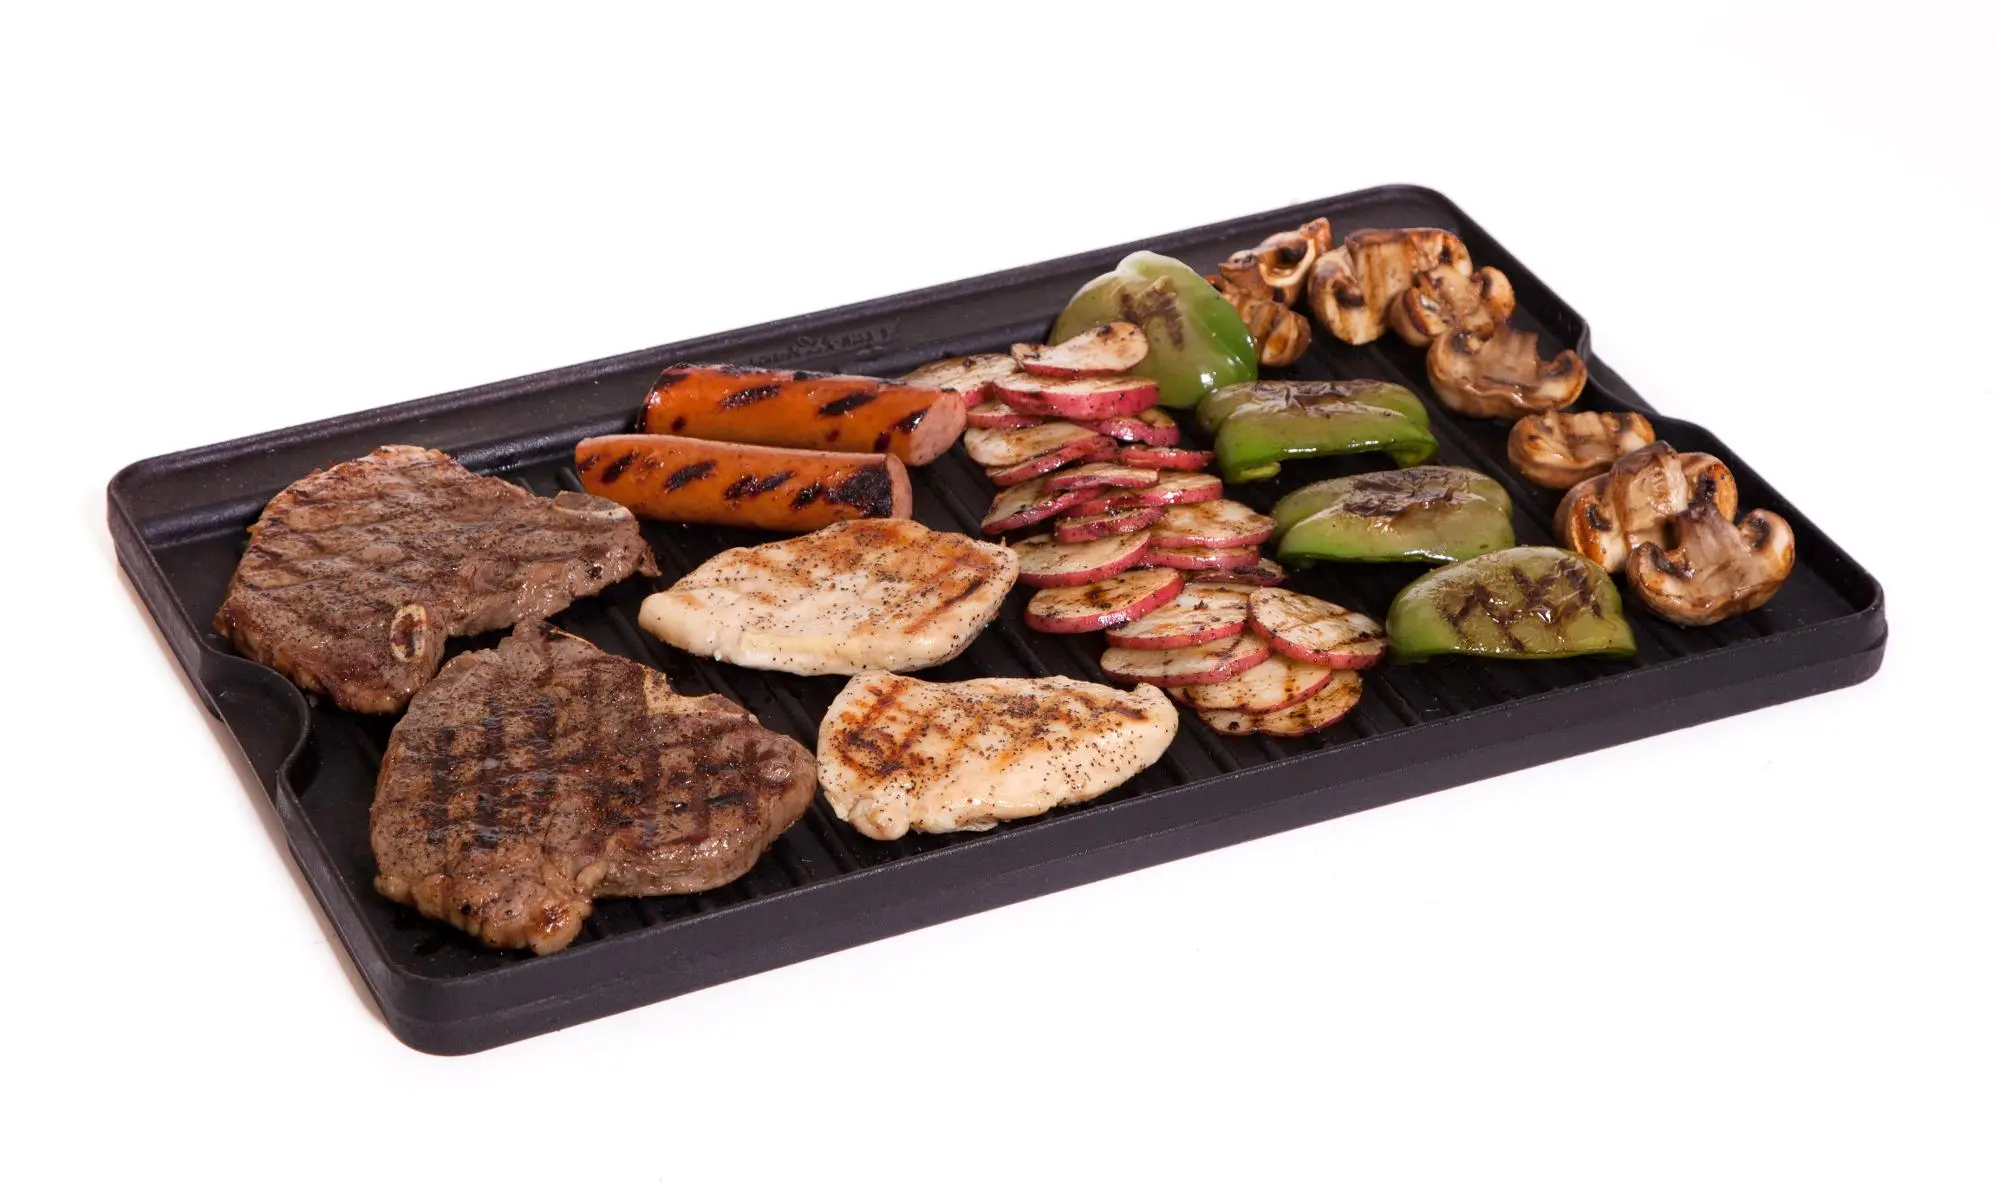 https://static.rcwilley.com/products/4403370/Reversible-Grill-Griddle-rcwilley-image1.webp